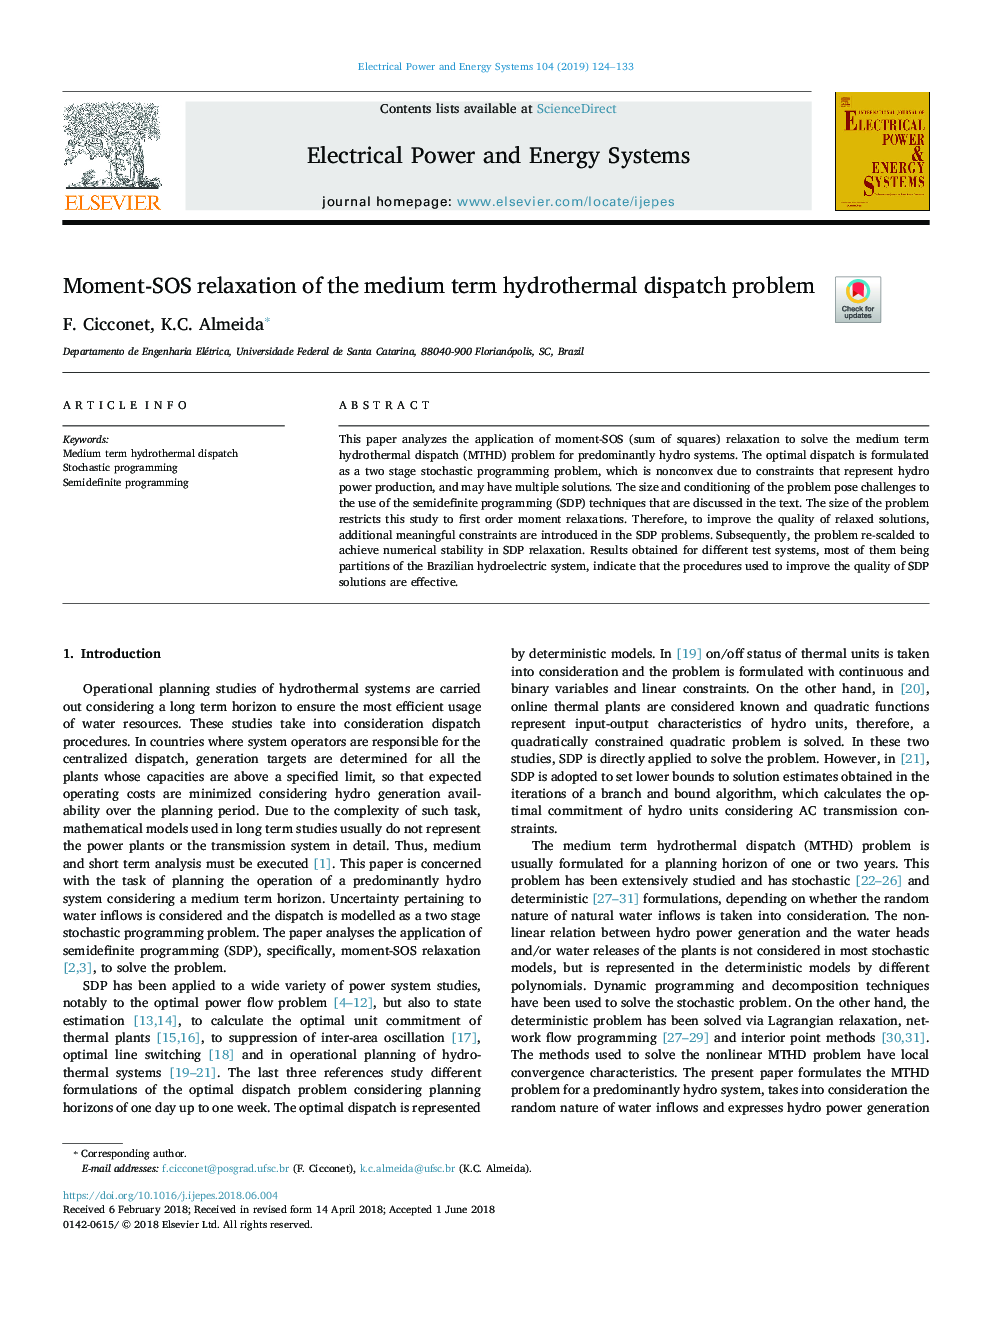 Moment-SOS relaxation of the medium term hydrothermal dispatch problem